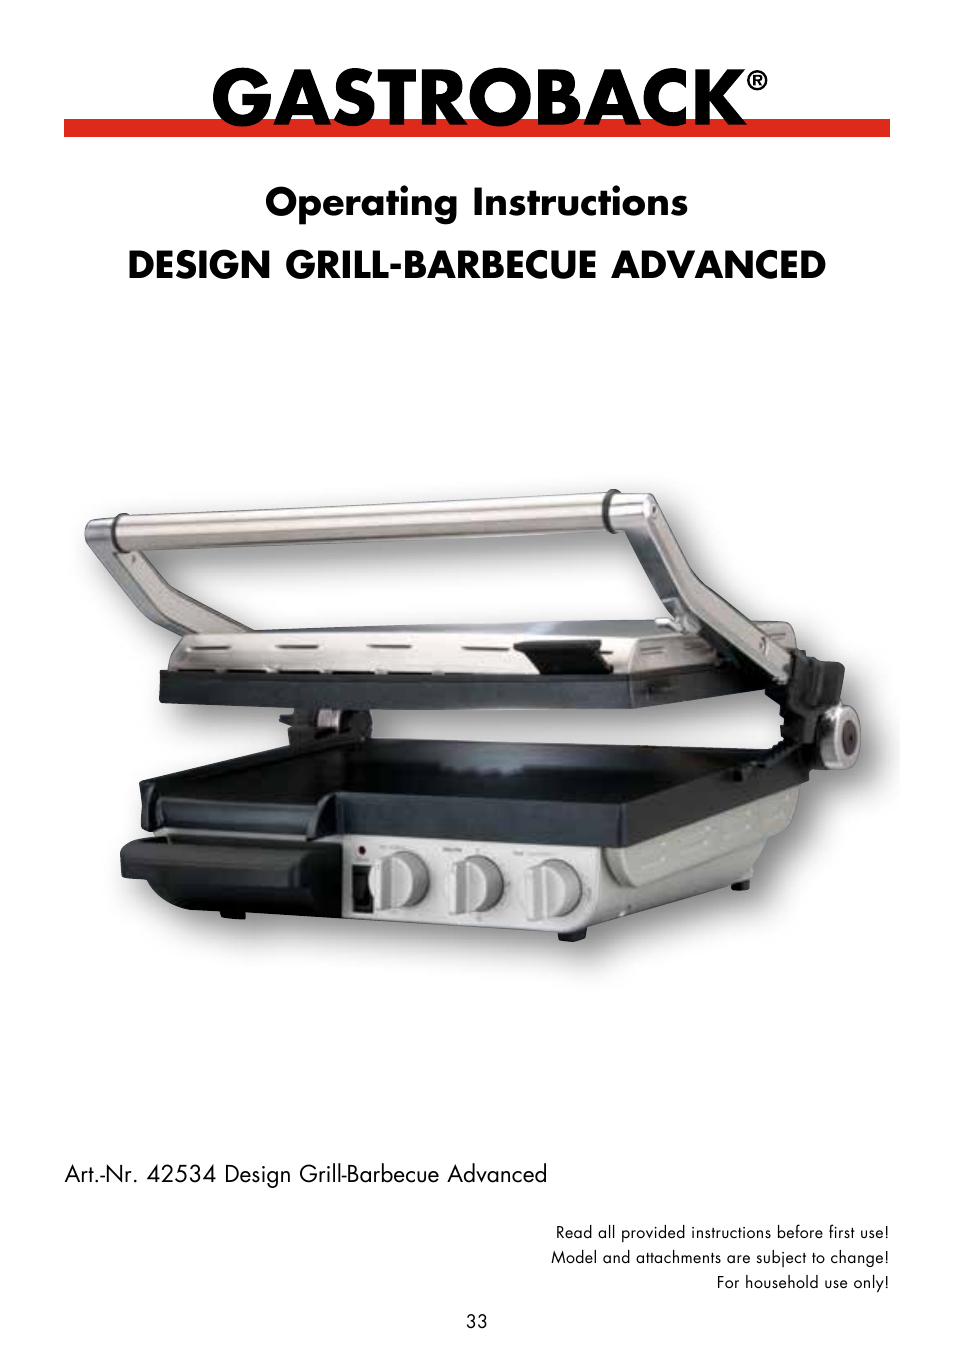 Gastroback 42534 Design Grill-Barbecue Advanced User Manual | 28 pages